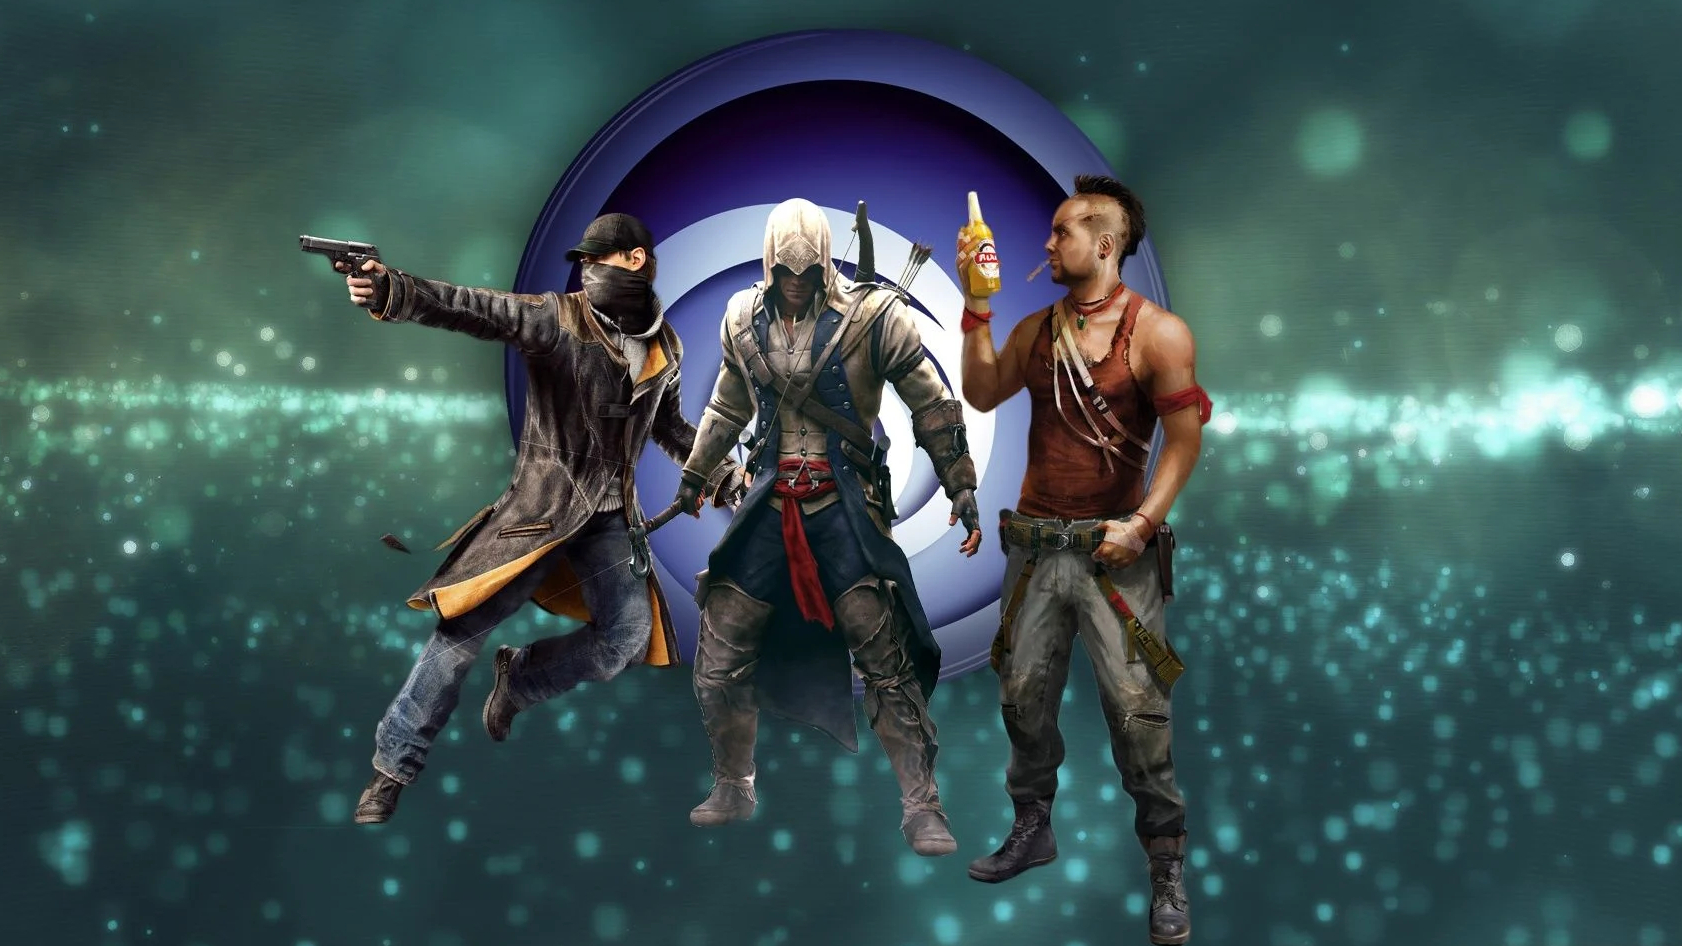 Ubisoft and THQ Nordic will be at gamescom 2022